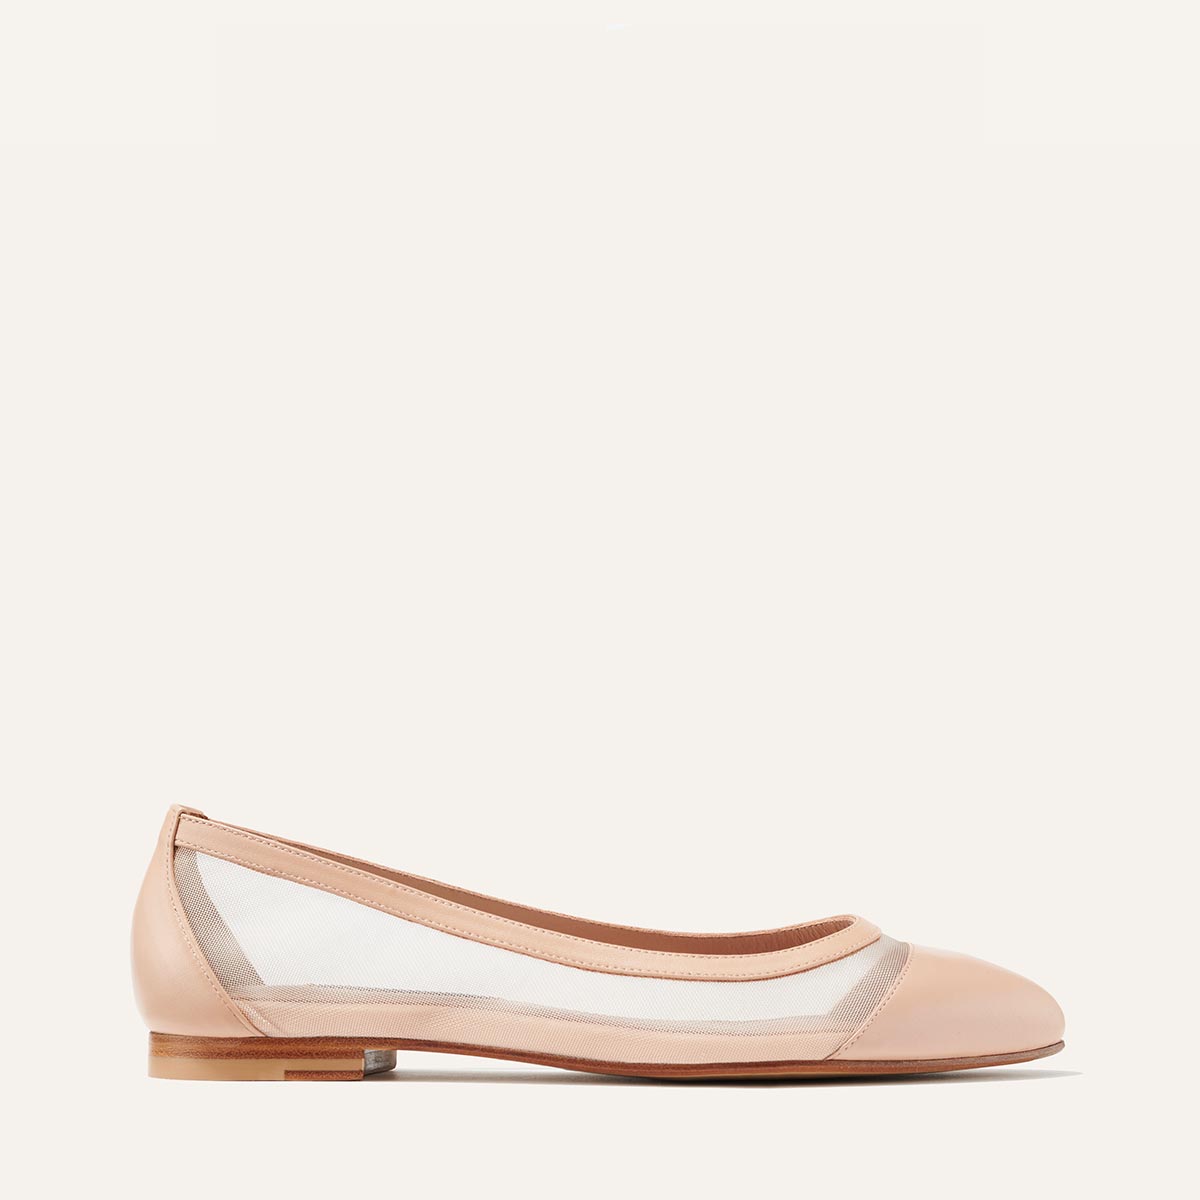 Margaux's classic and comfortable Pointe ballet flat in soft, nude pink Italian nappa leather and mesh with an elegant pointed toe